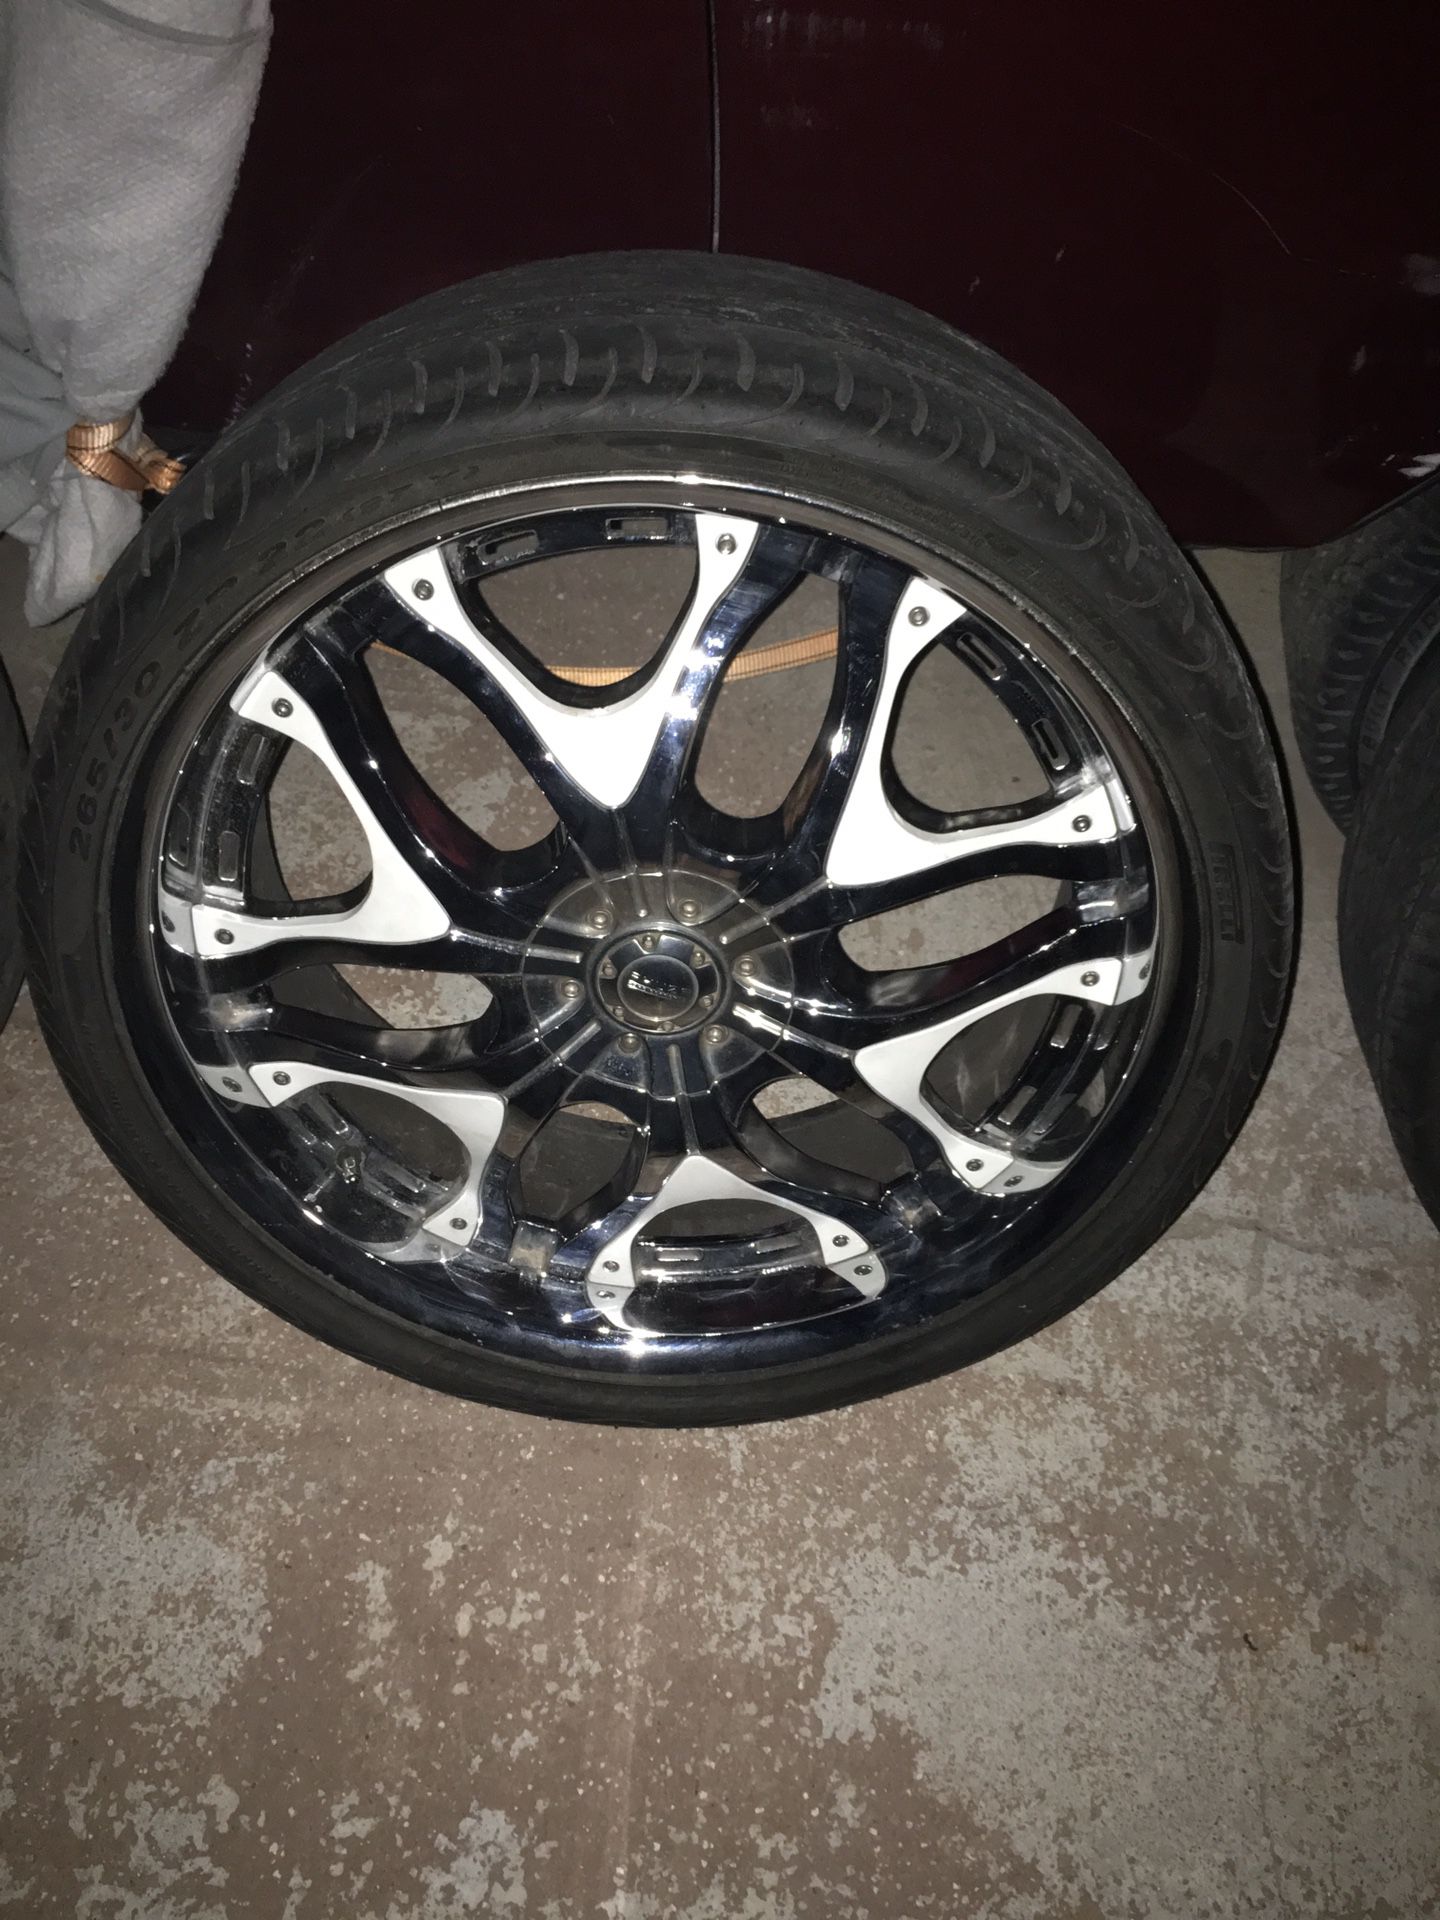 22 INCH RIMS ALL 4 FOR $500